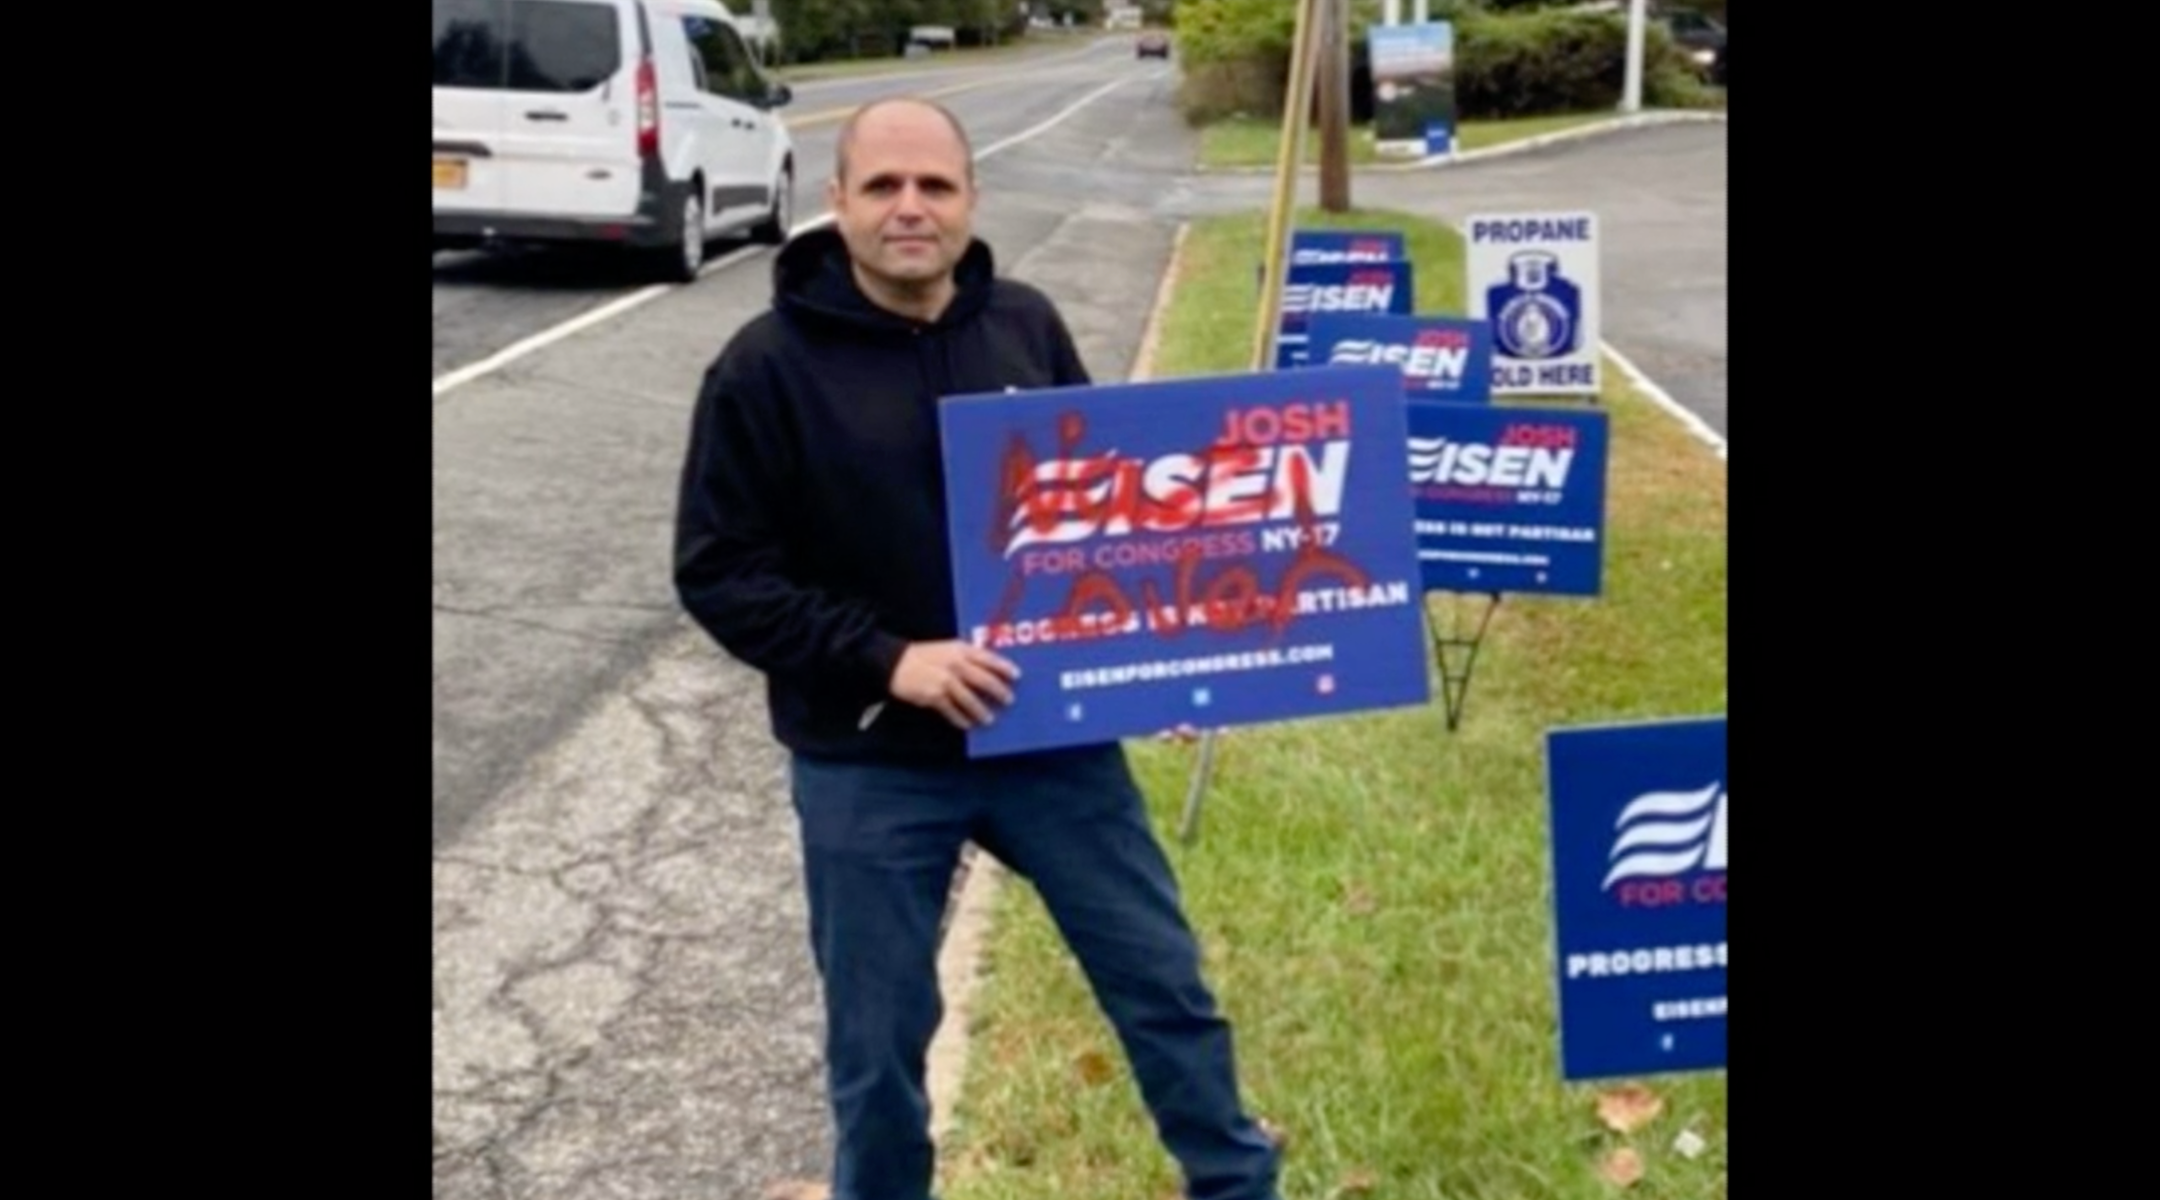 Congressional candidate Josh Eisen holds a campaign sign tagged with anti-Semitic graffiti. (Screenshot from News12)